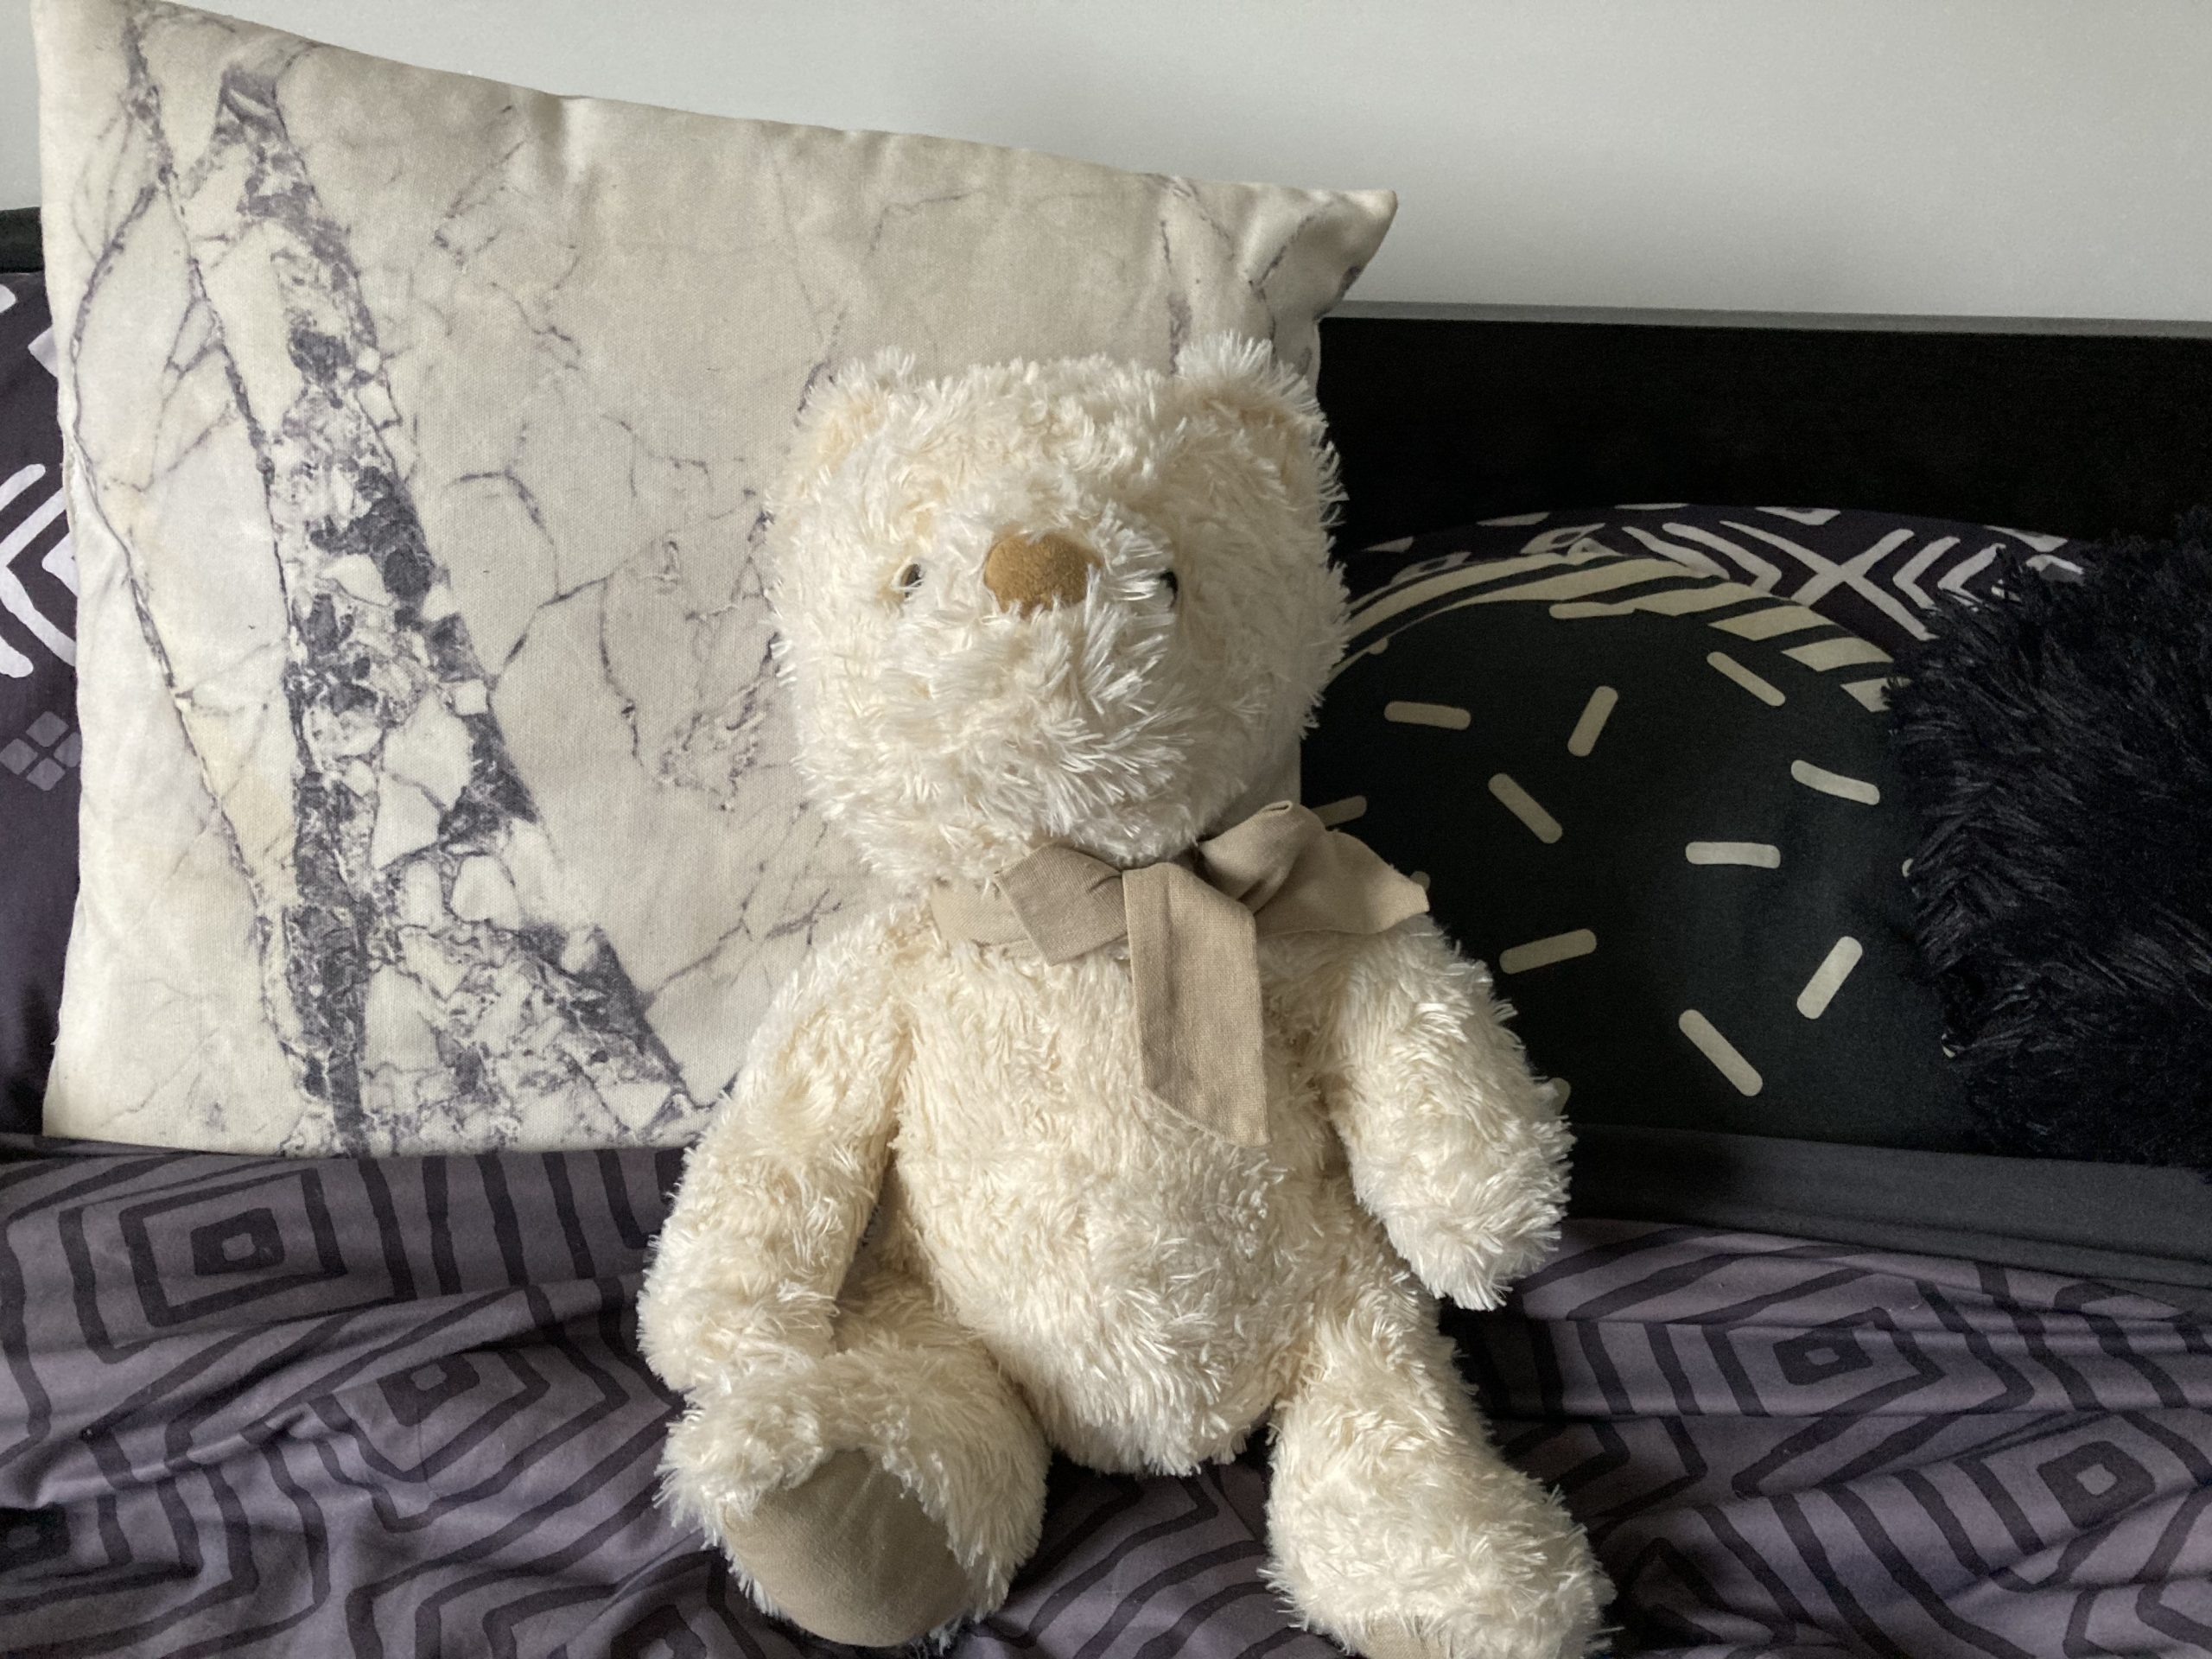 Still Sleep With Your Childhood Stuffed Toy? You’re Not Alone